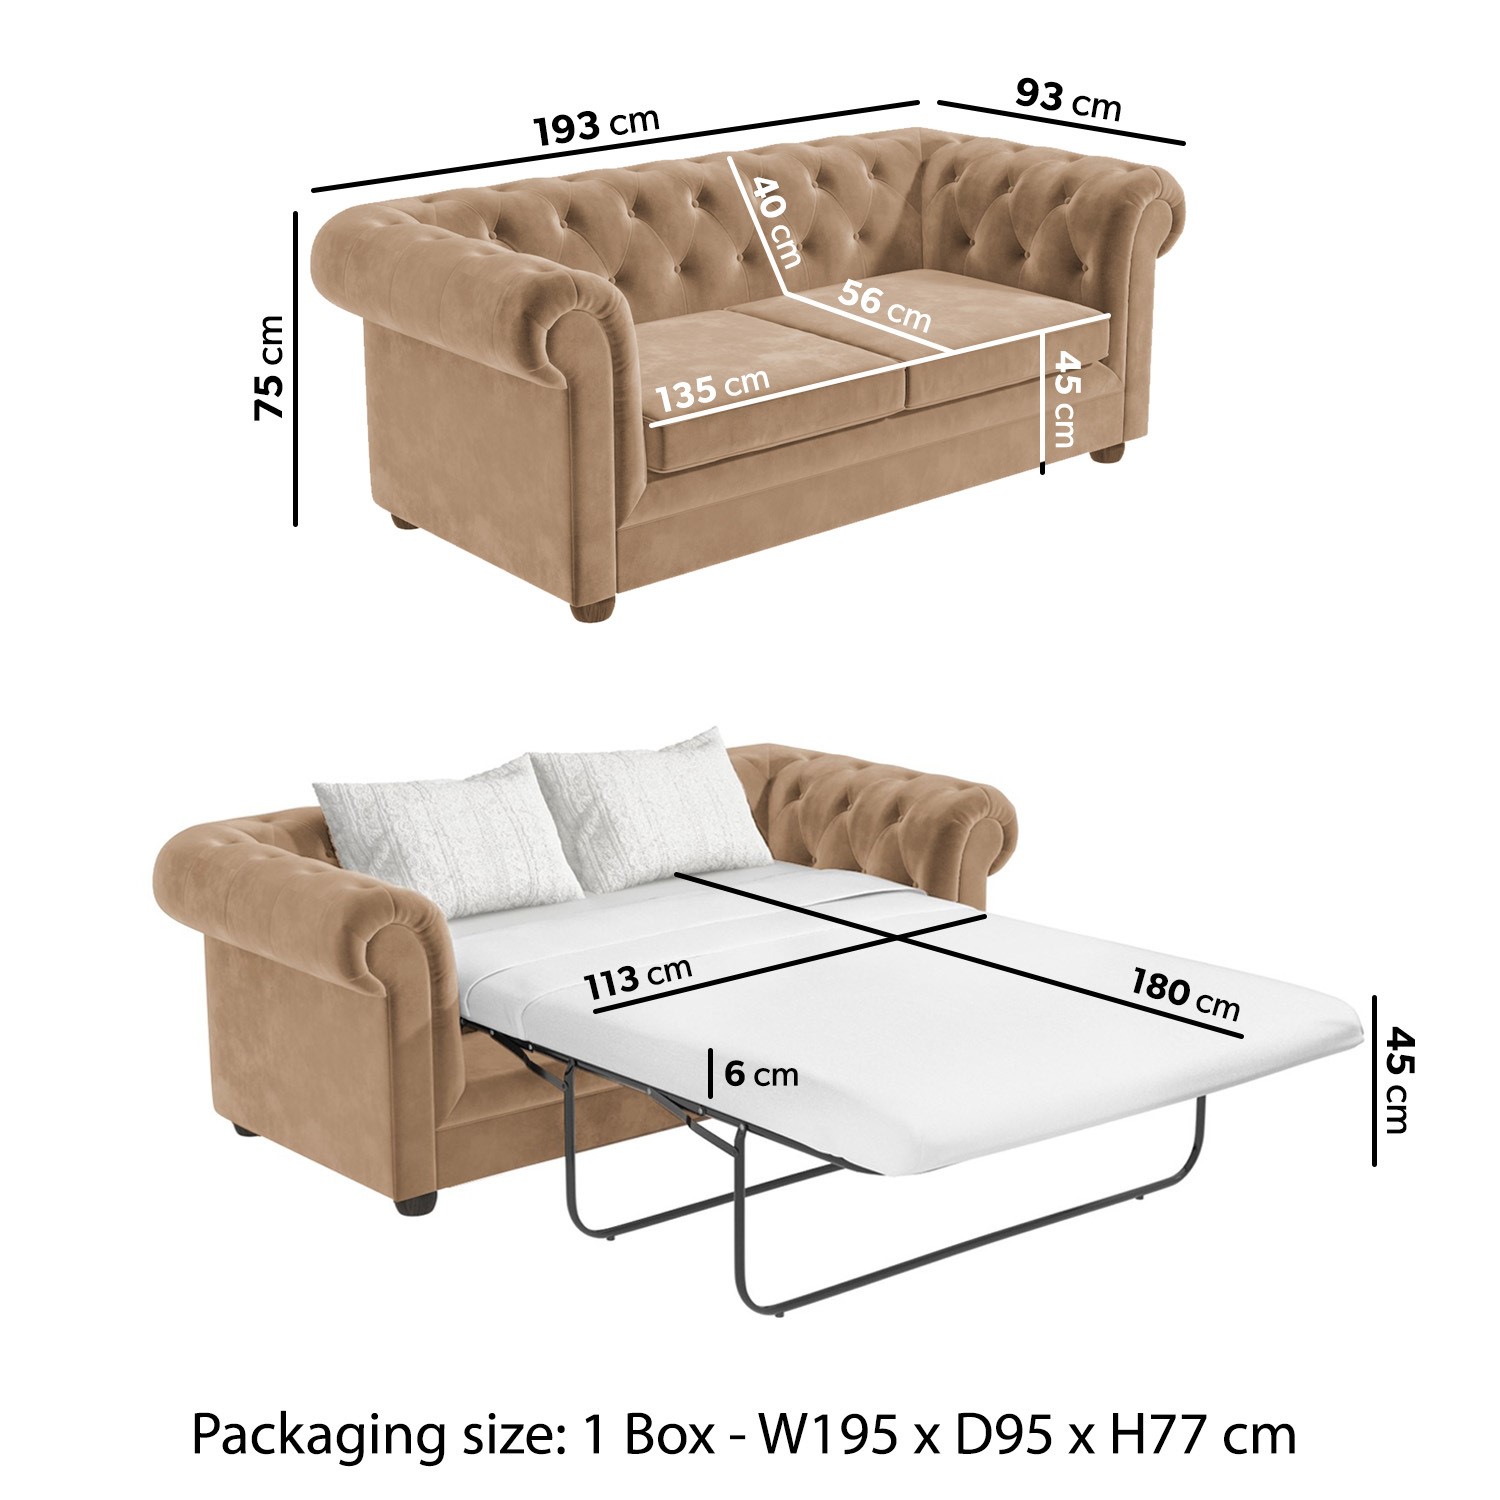 3 Seater Chesterfield Sofa Bed In Beige, Cream Leather Chesterfield Sofa Bed